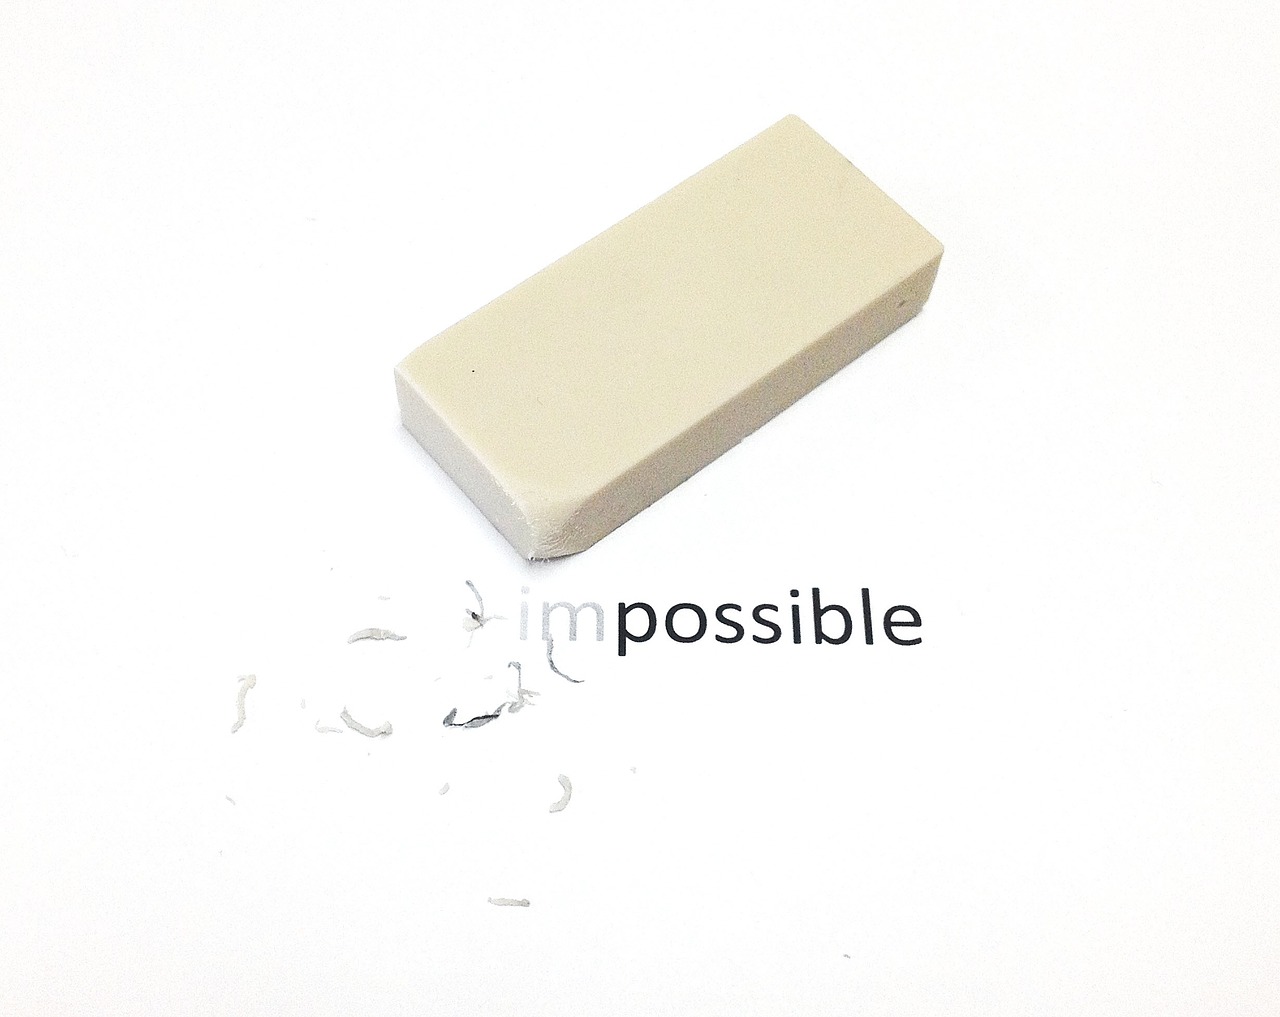 impossible possible eraser free photo